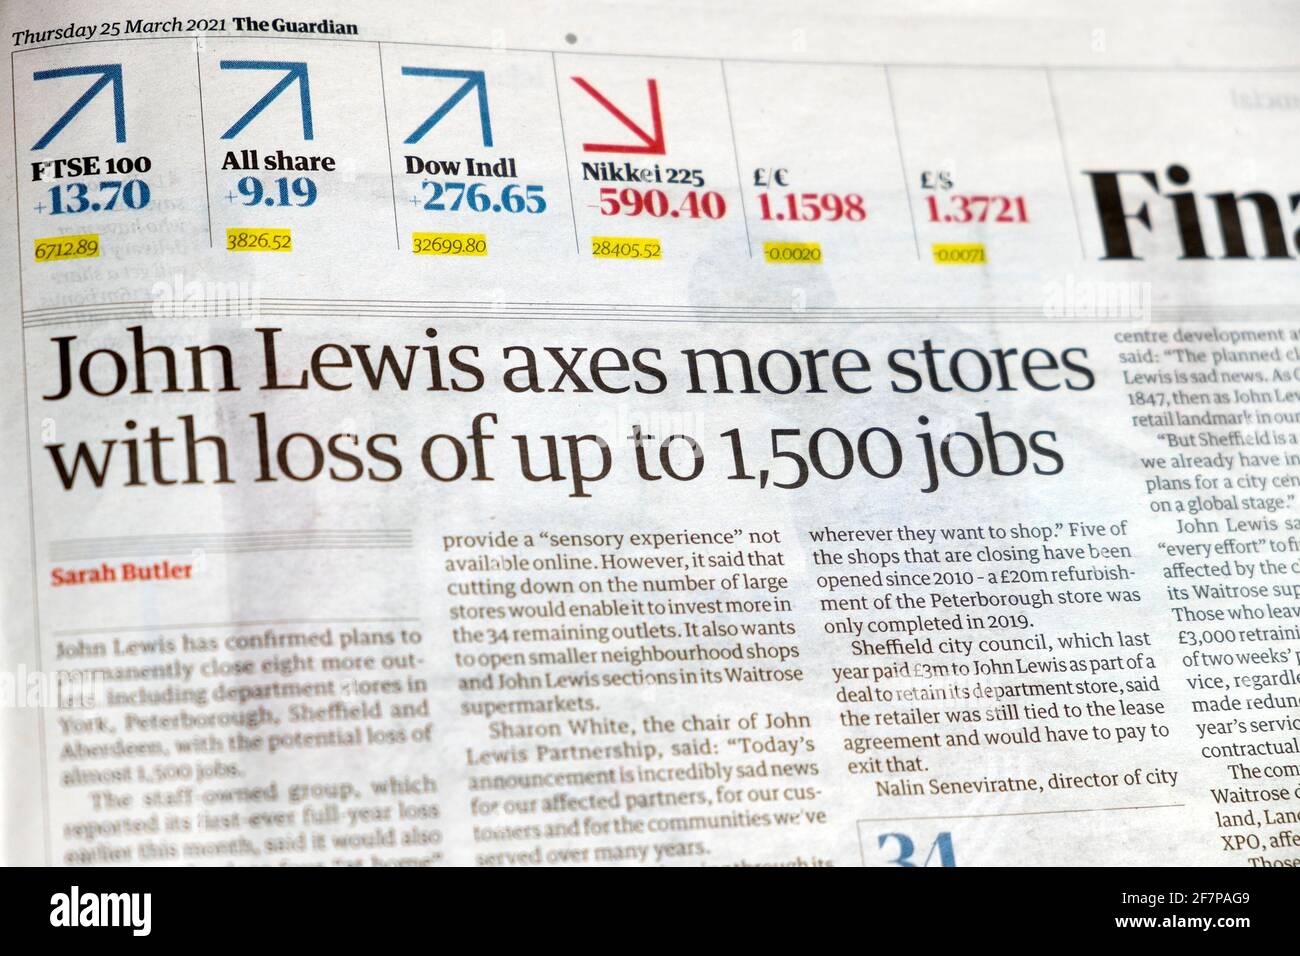 John Lewis axes more stores with loss of up to 1,500 jobs" newspaper  headline inside page store article in Guardian 25 March 2021 London England  UK Stock Photo - Alamy